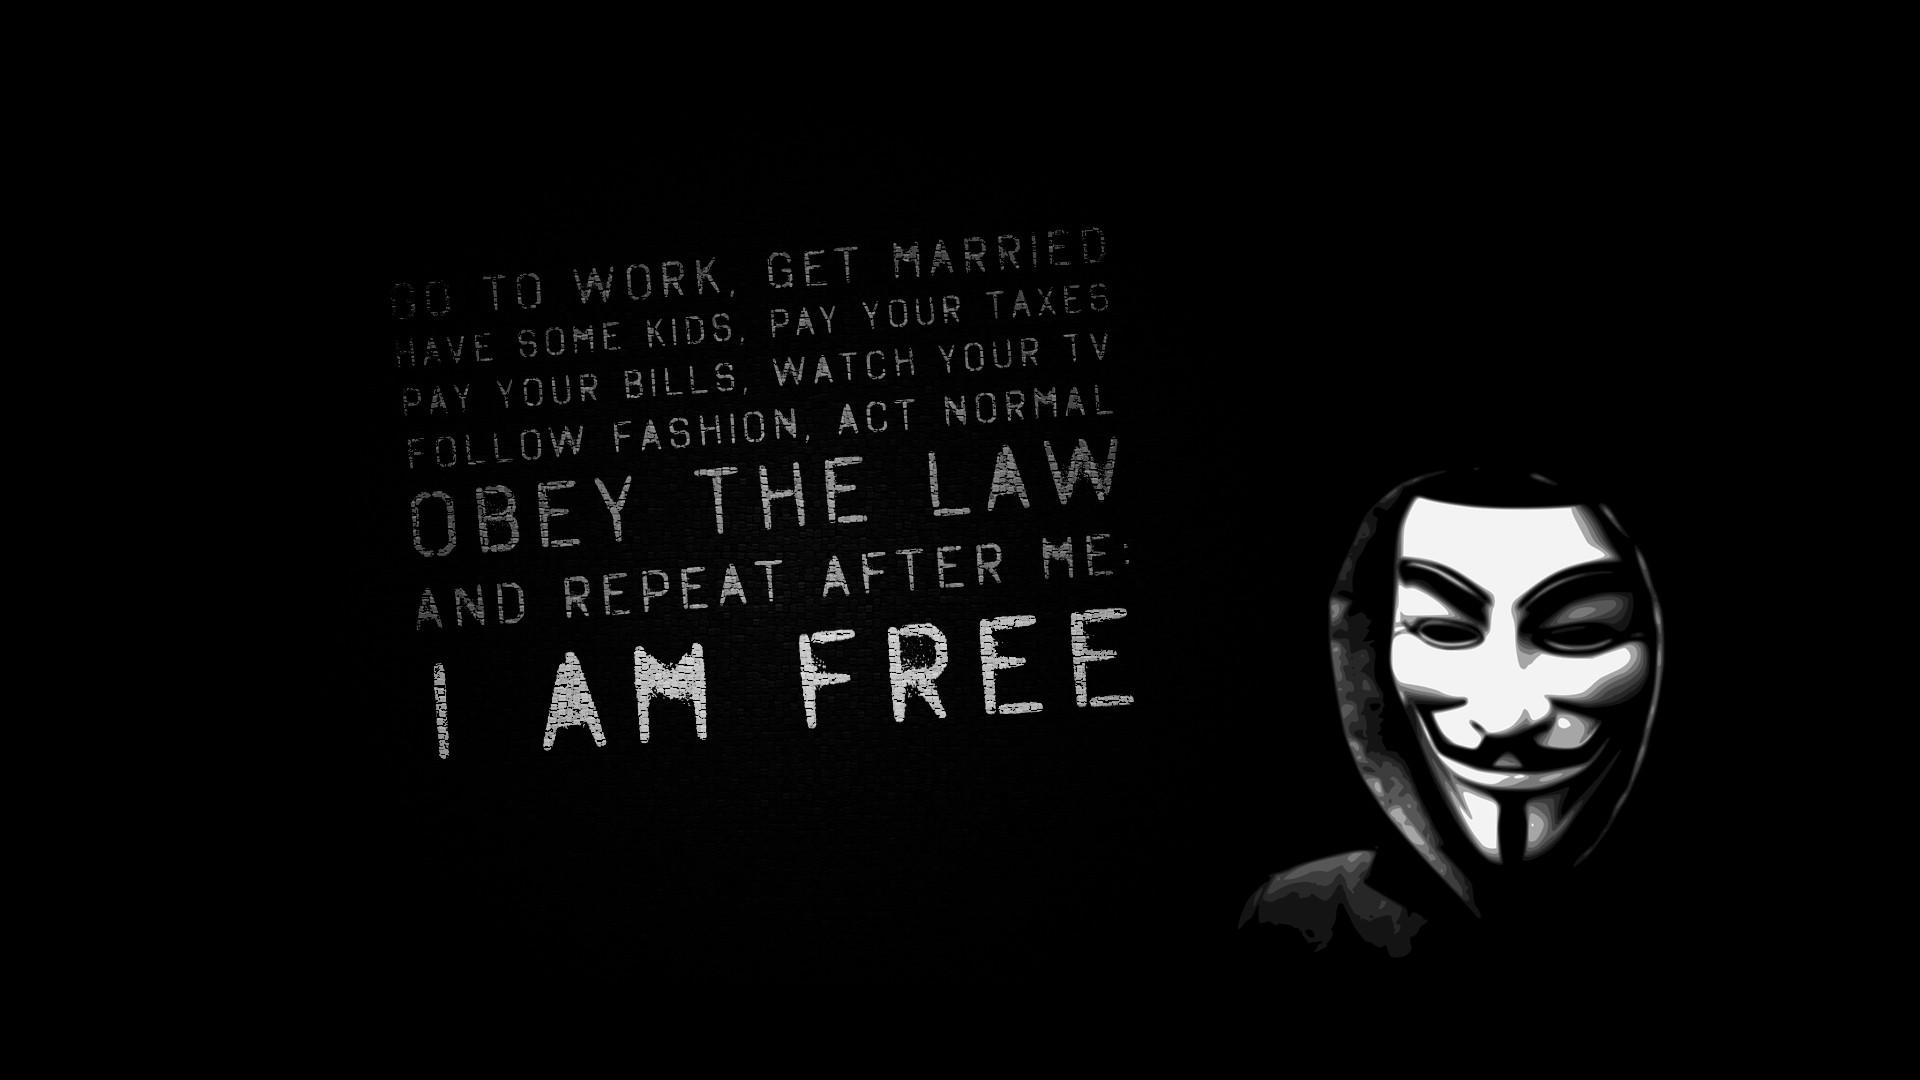 Anonymous Hackers Wallpaper and Free. Visual